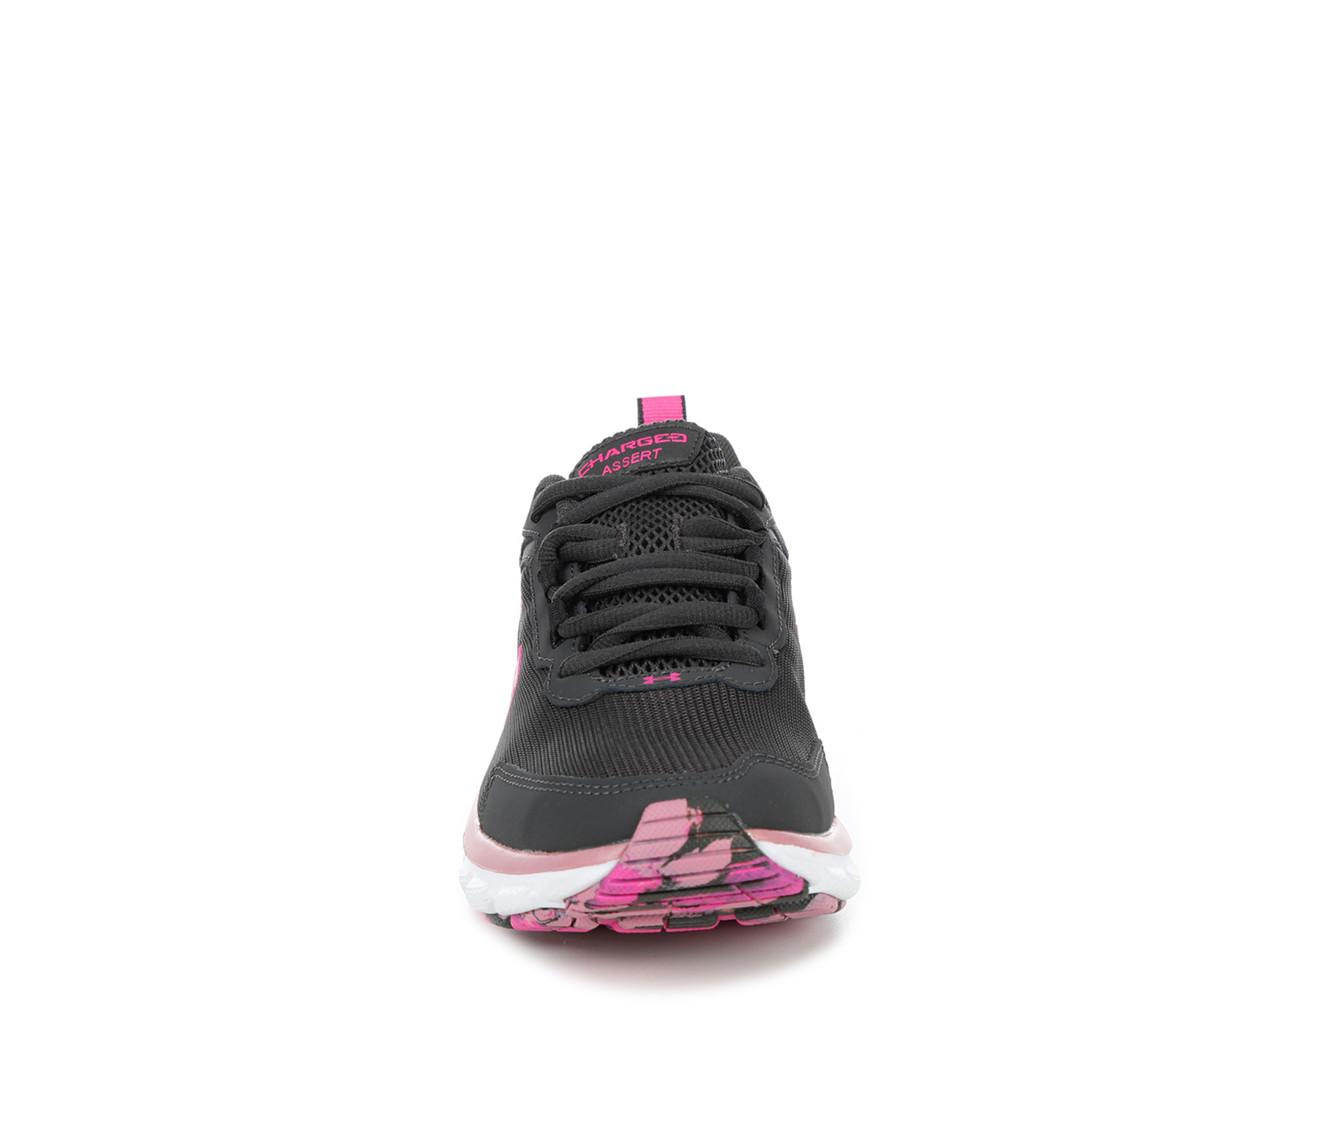 Under Armour Women's Charged Assert 9 Marble Wide D Running Shoes - Prime  Pink / Black